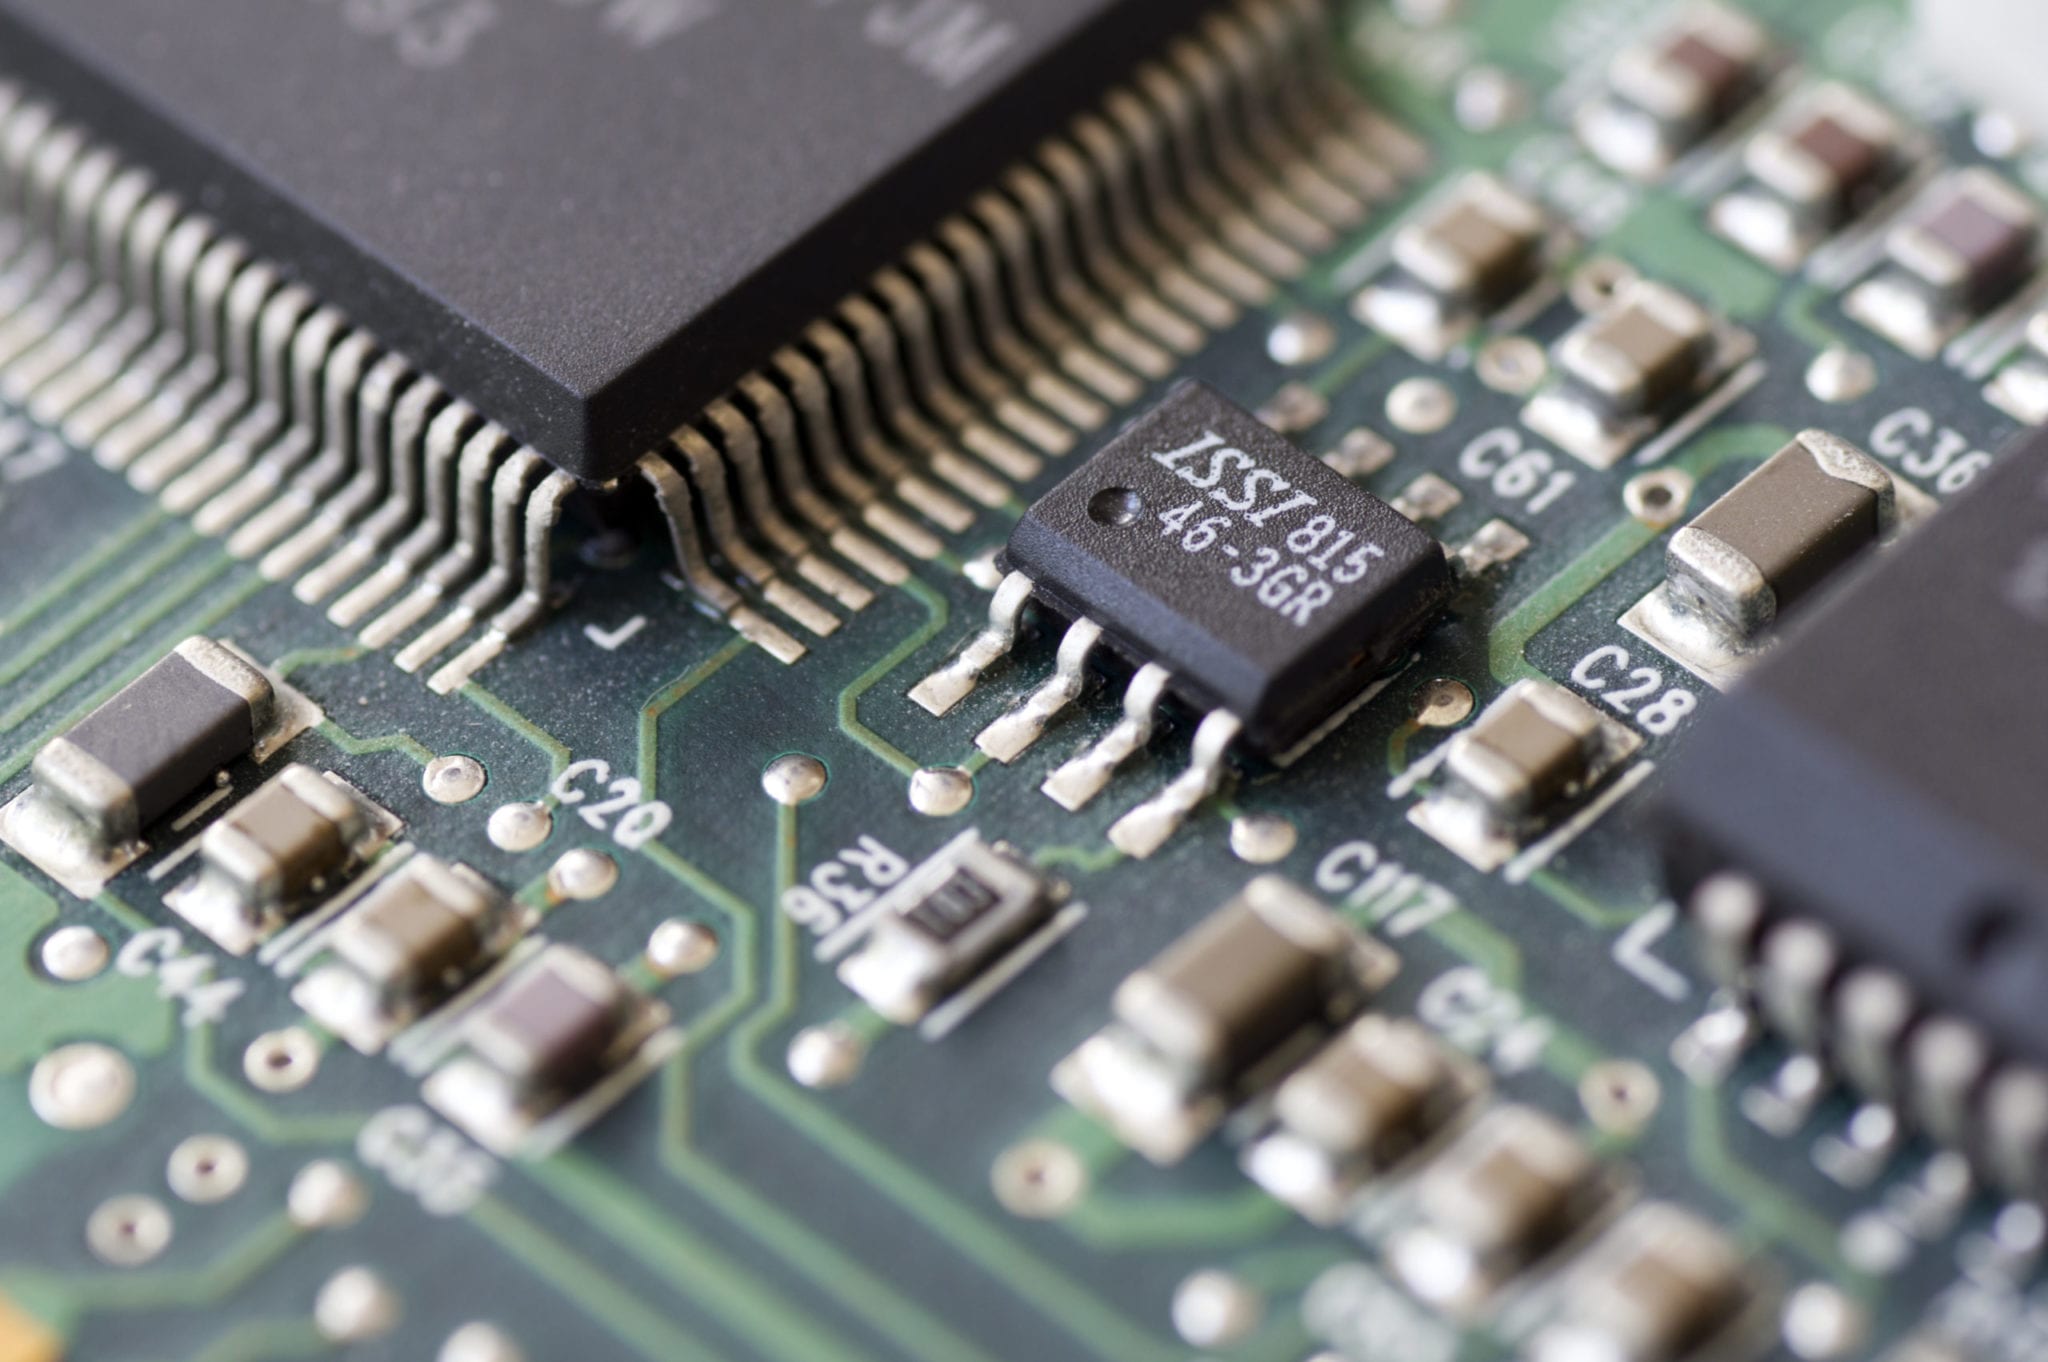 Closeup of a printed circuit board with components such as integrated circuits